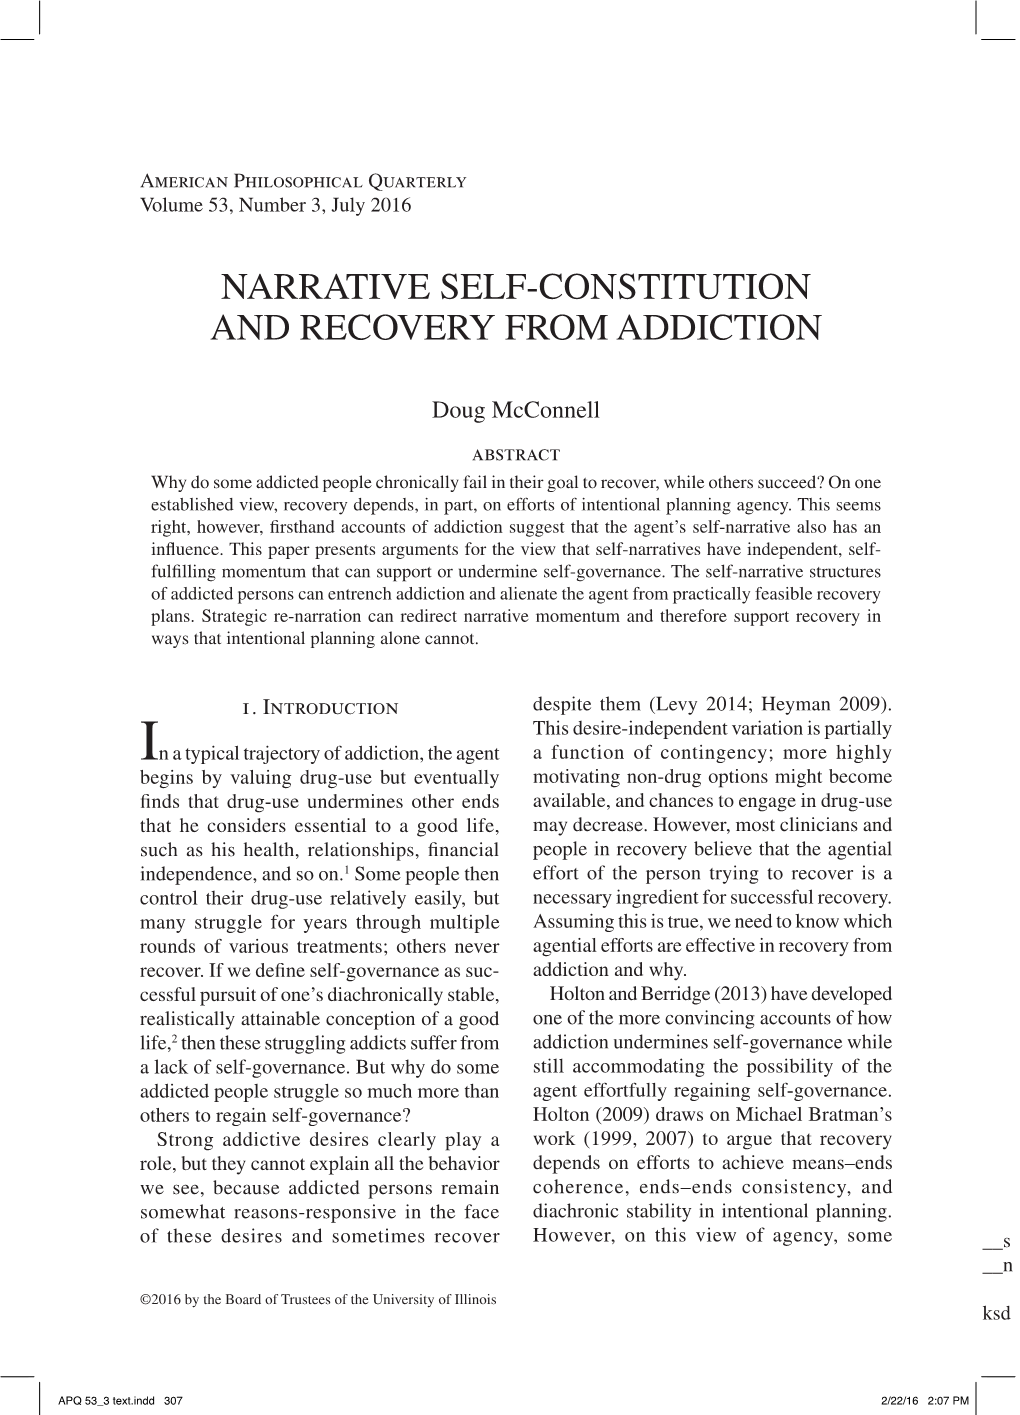 Narrative Self- Constitution and Recovery from Addiction